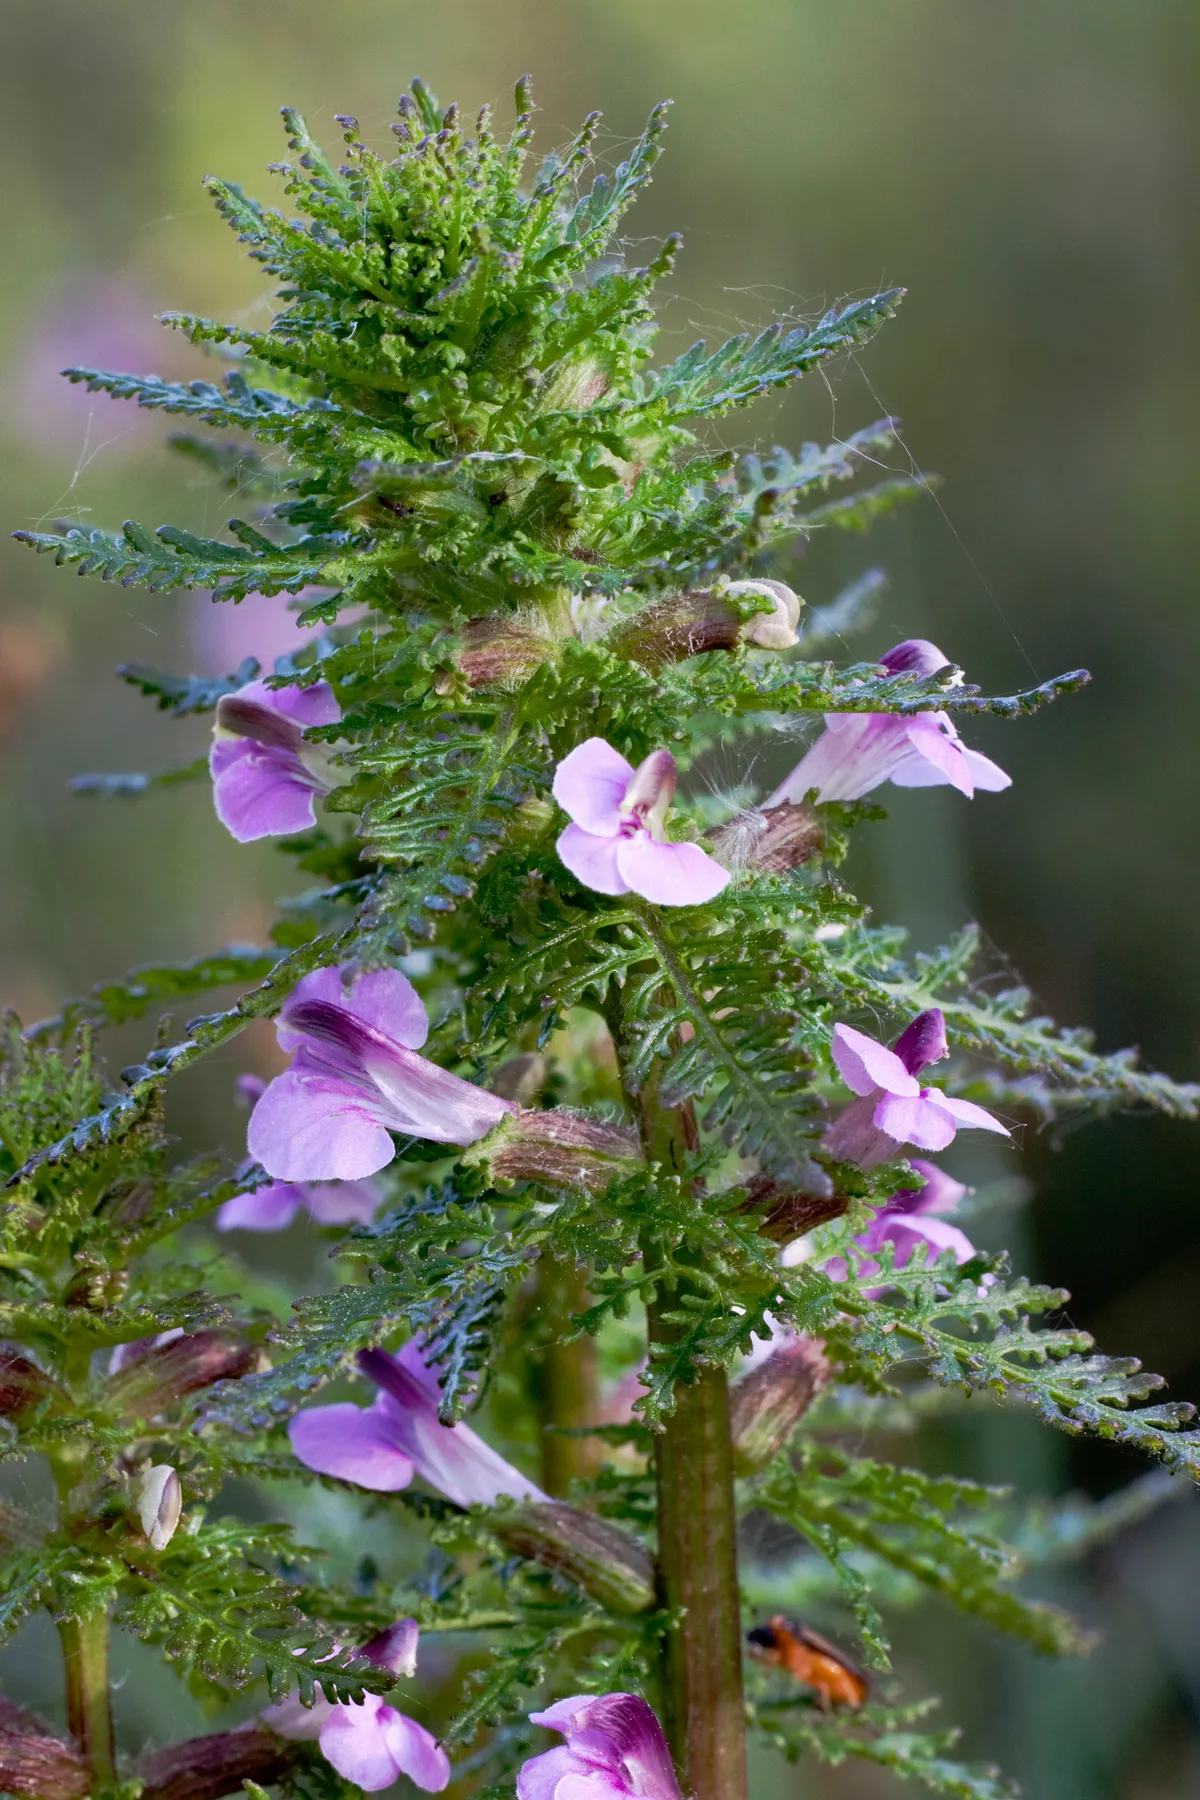 Marsh lousewort with dark green leaves resembling a miniature fern and delicate pink-purple flowers